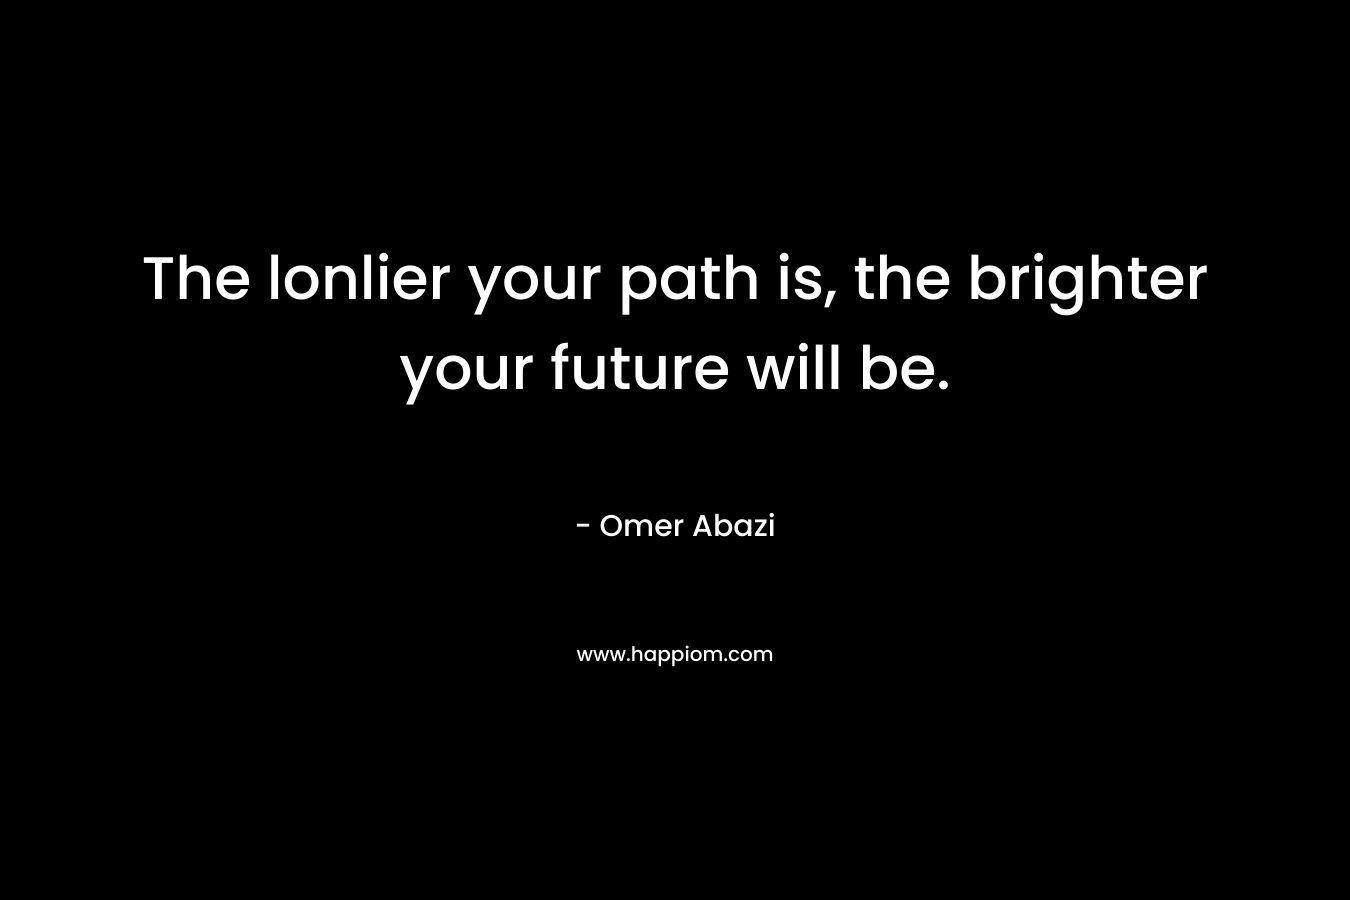 The lonlier your path is, the brighter your future will be.